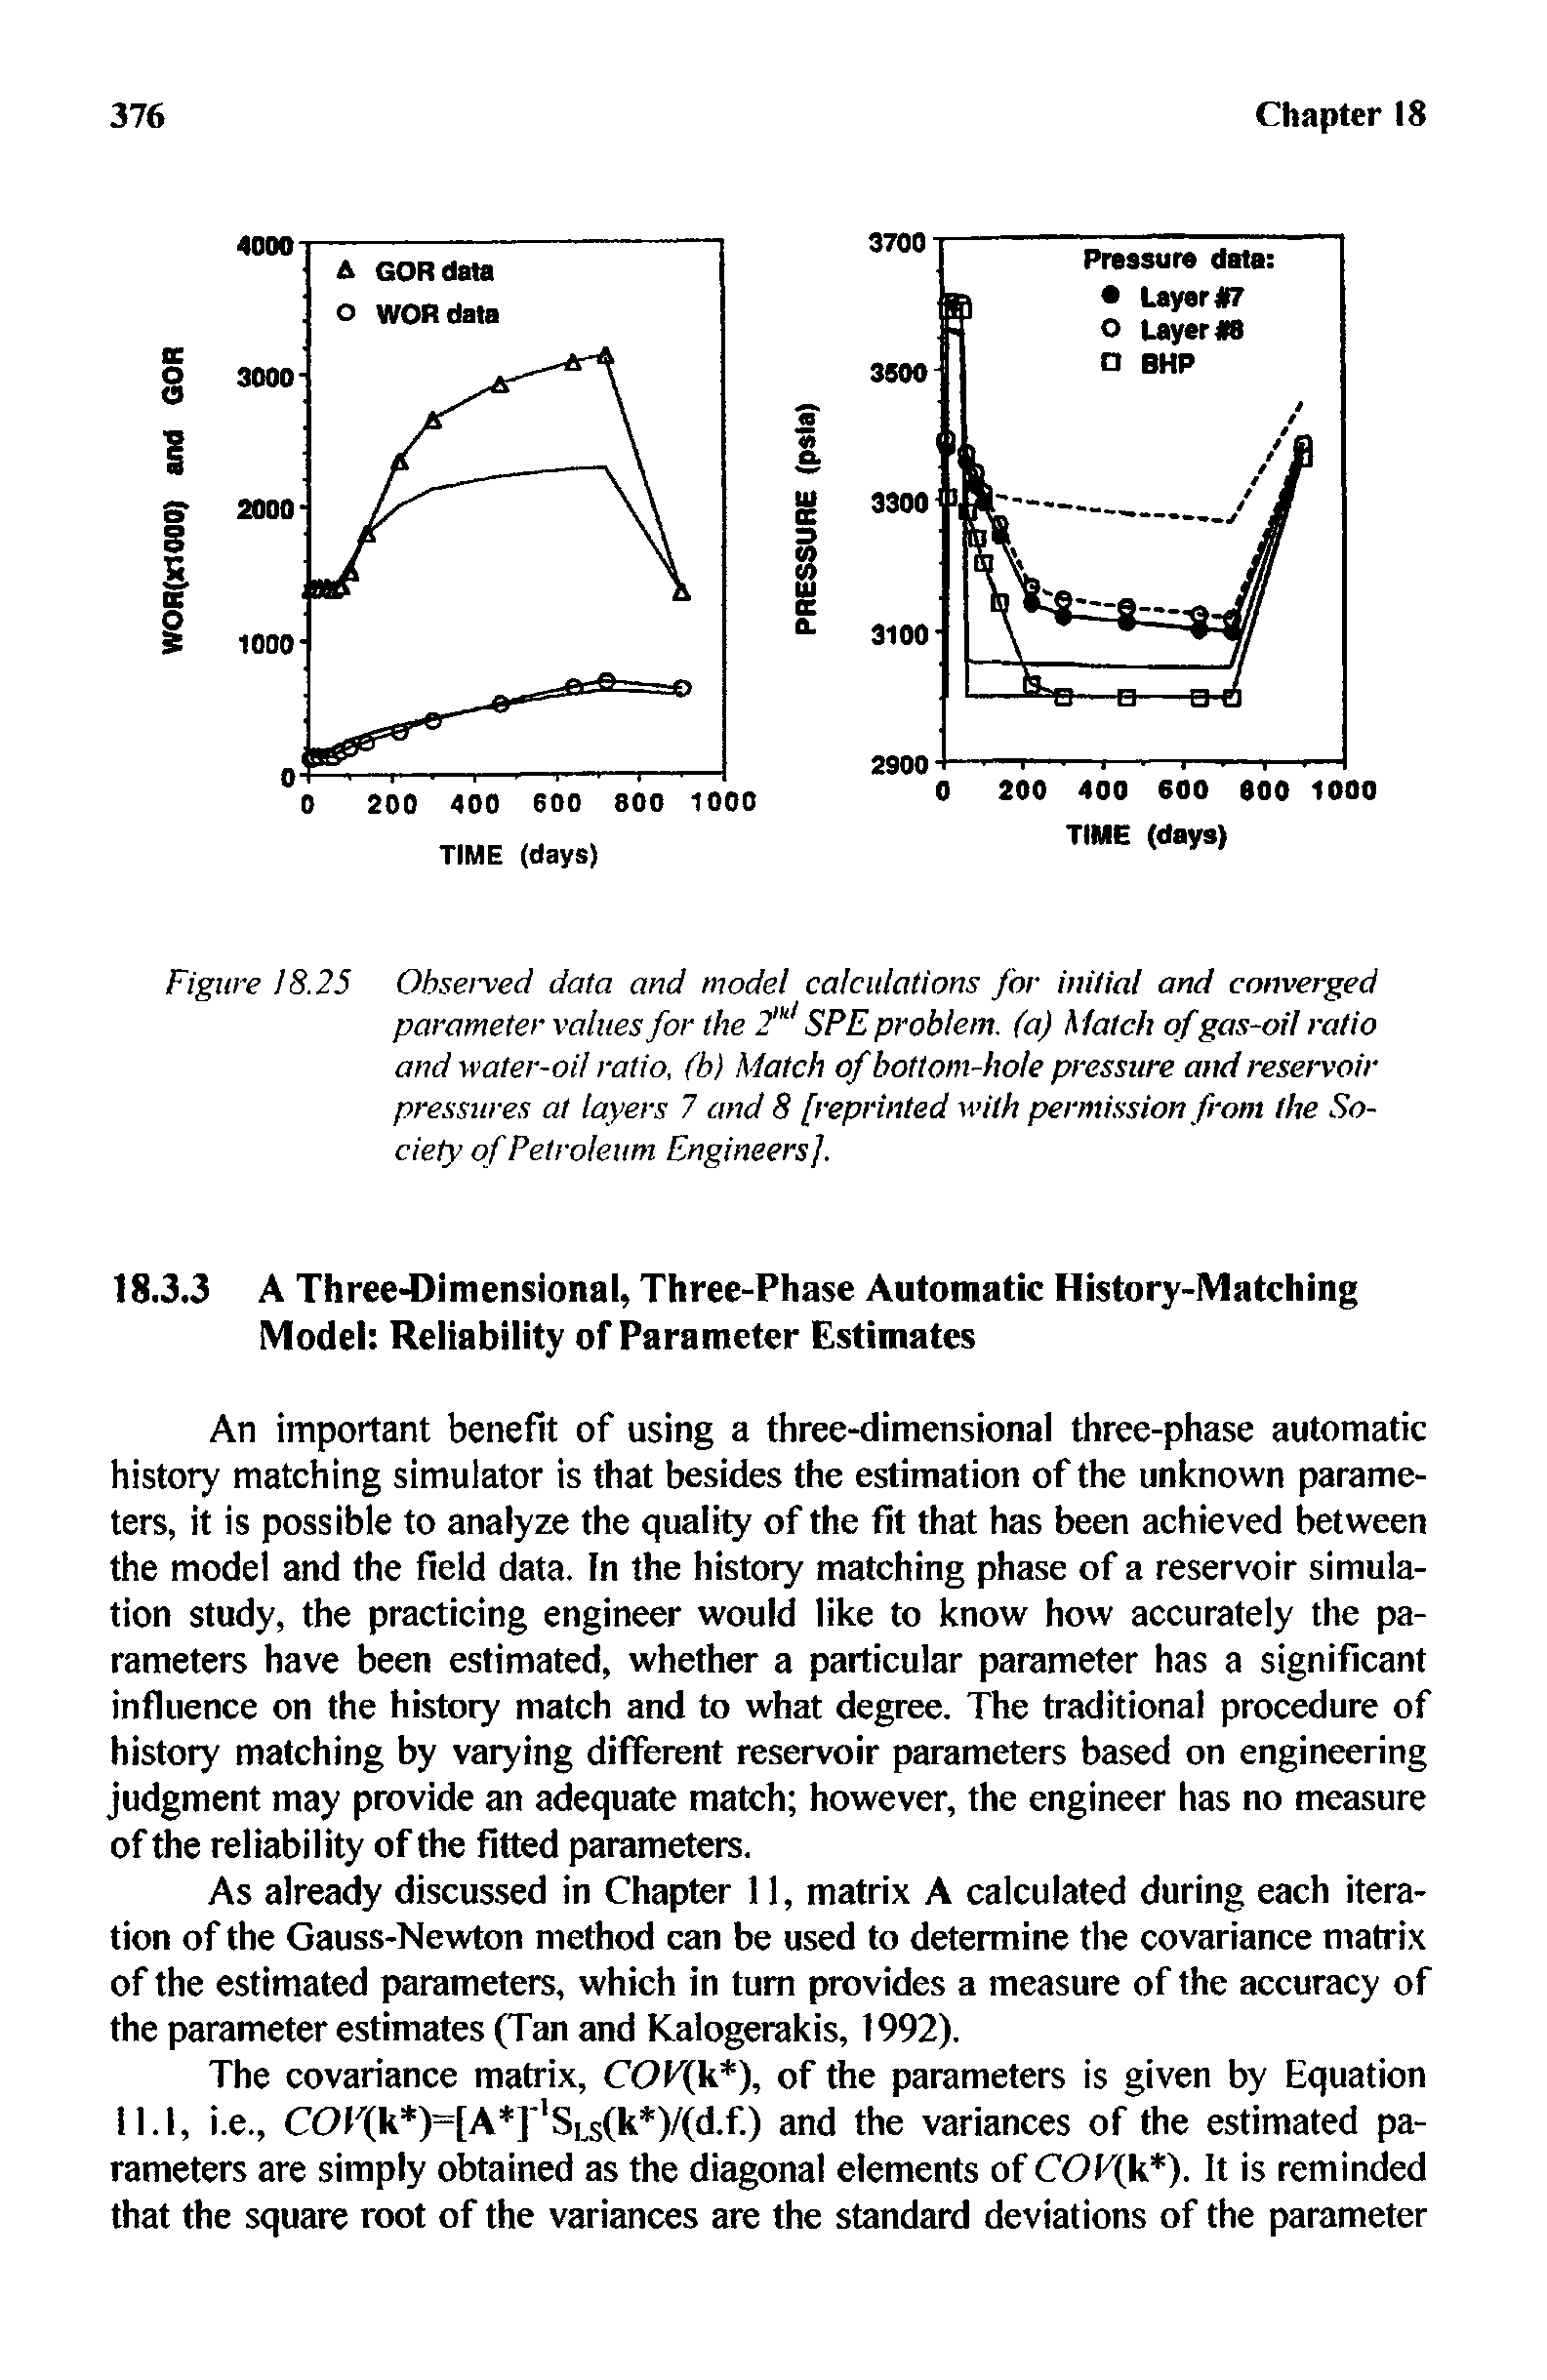 Figure 18.25 Observed data and model calculations for initial and converged parameter values for the 2"d SPE problem, (a) Match ofgas-oil ratio and water-oil ratio, (b) Match of bottom-hole pressure and reservoir pressures at layers 7 and 8 [reprinted with permission from the Society of Petroleum Engineers].